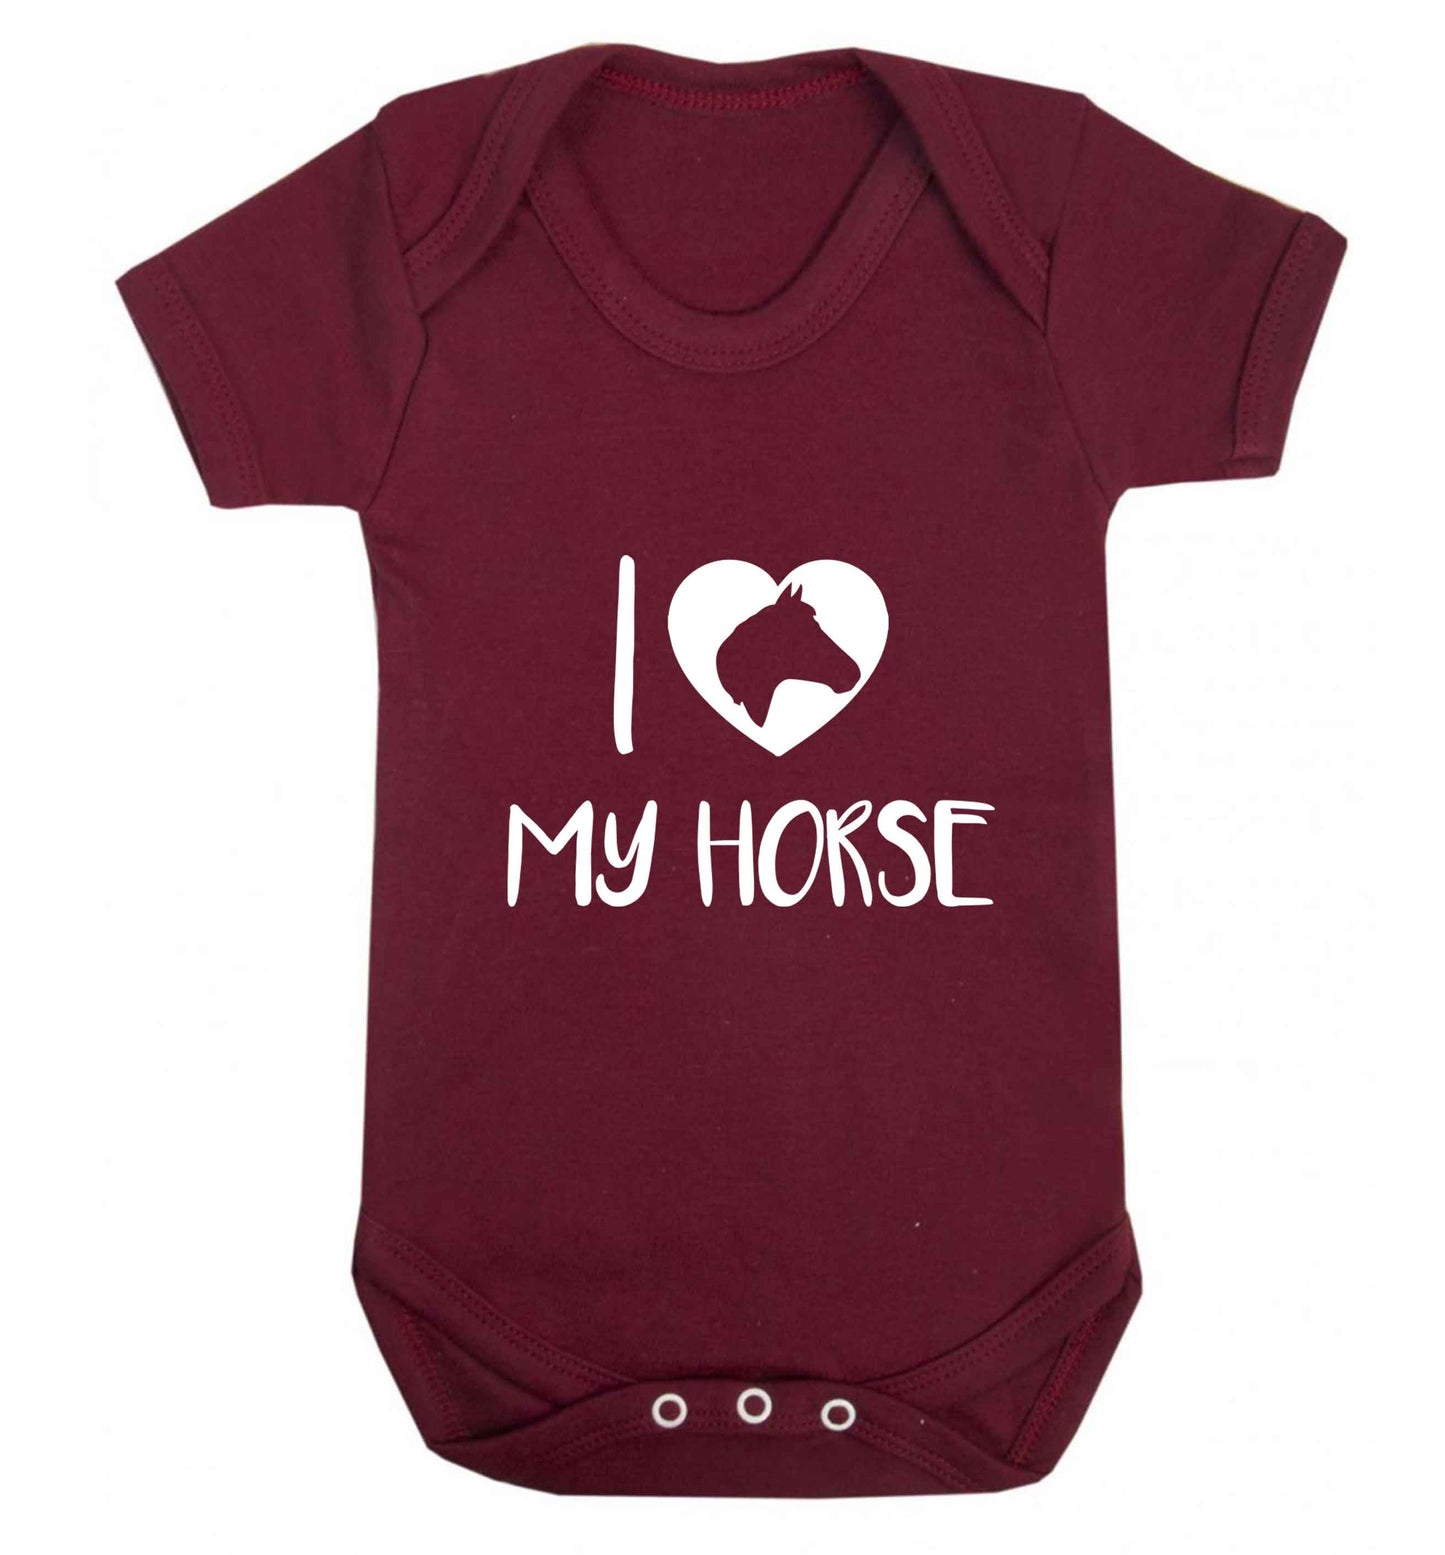 I love my horse baby vest maroon 18-24 months